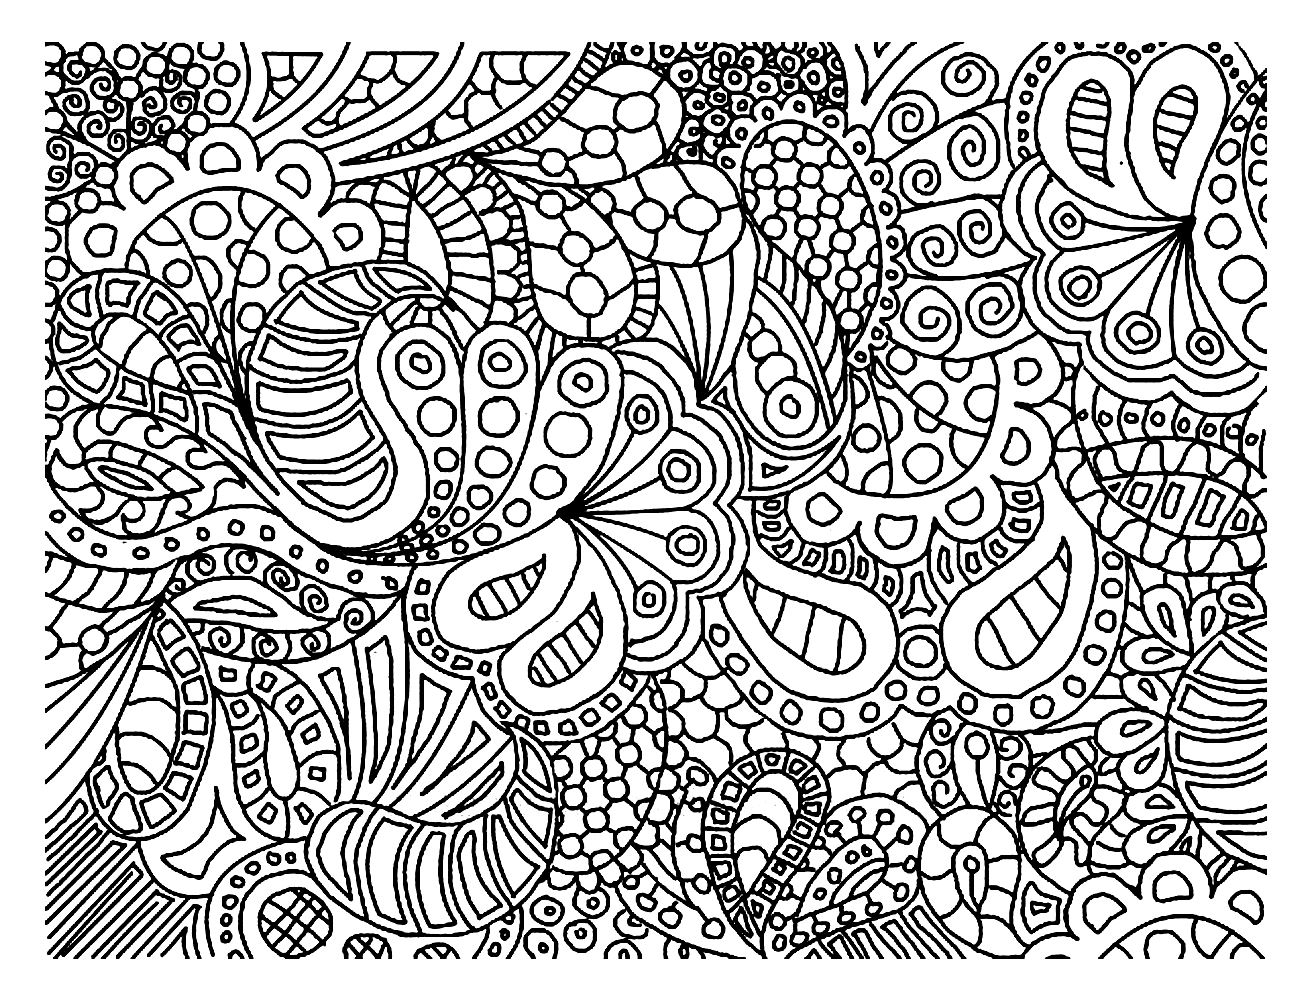 Doodle Art A Leisurely Analysis